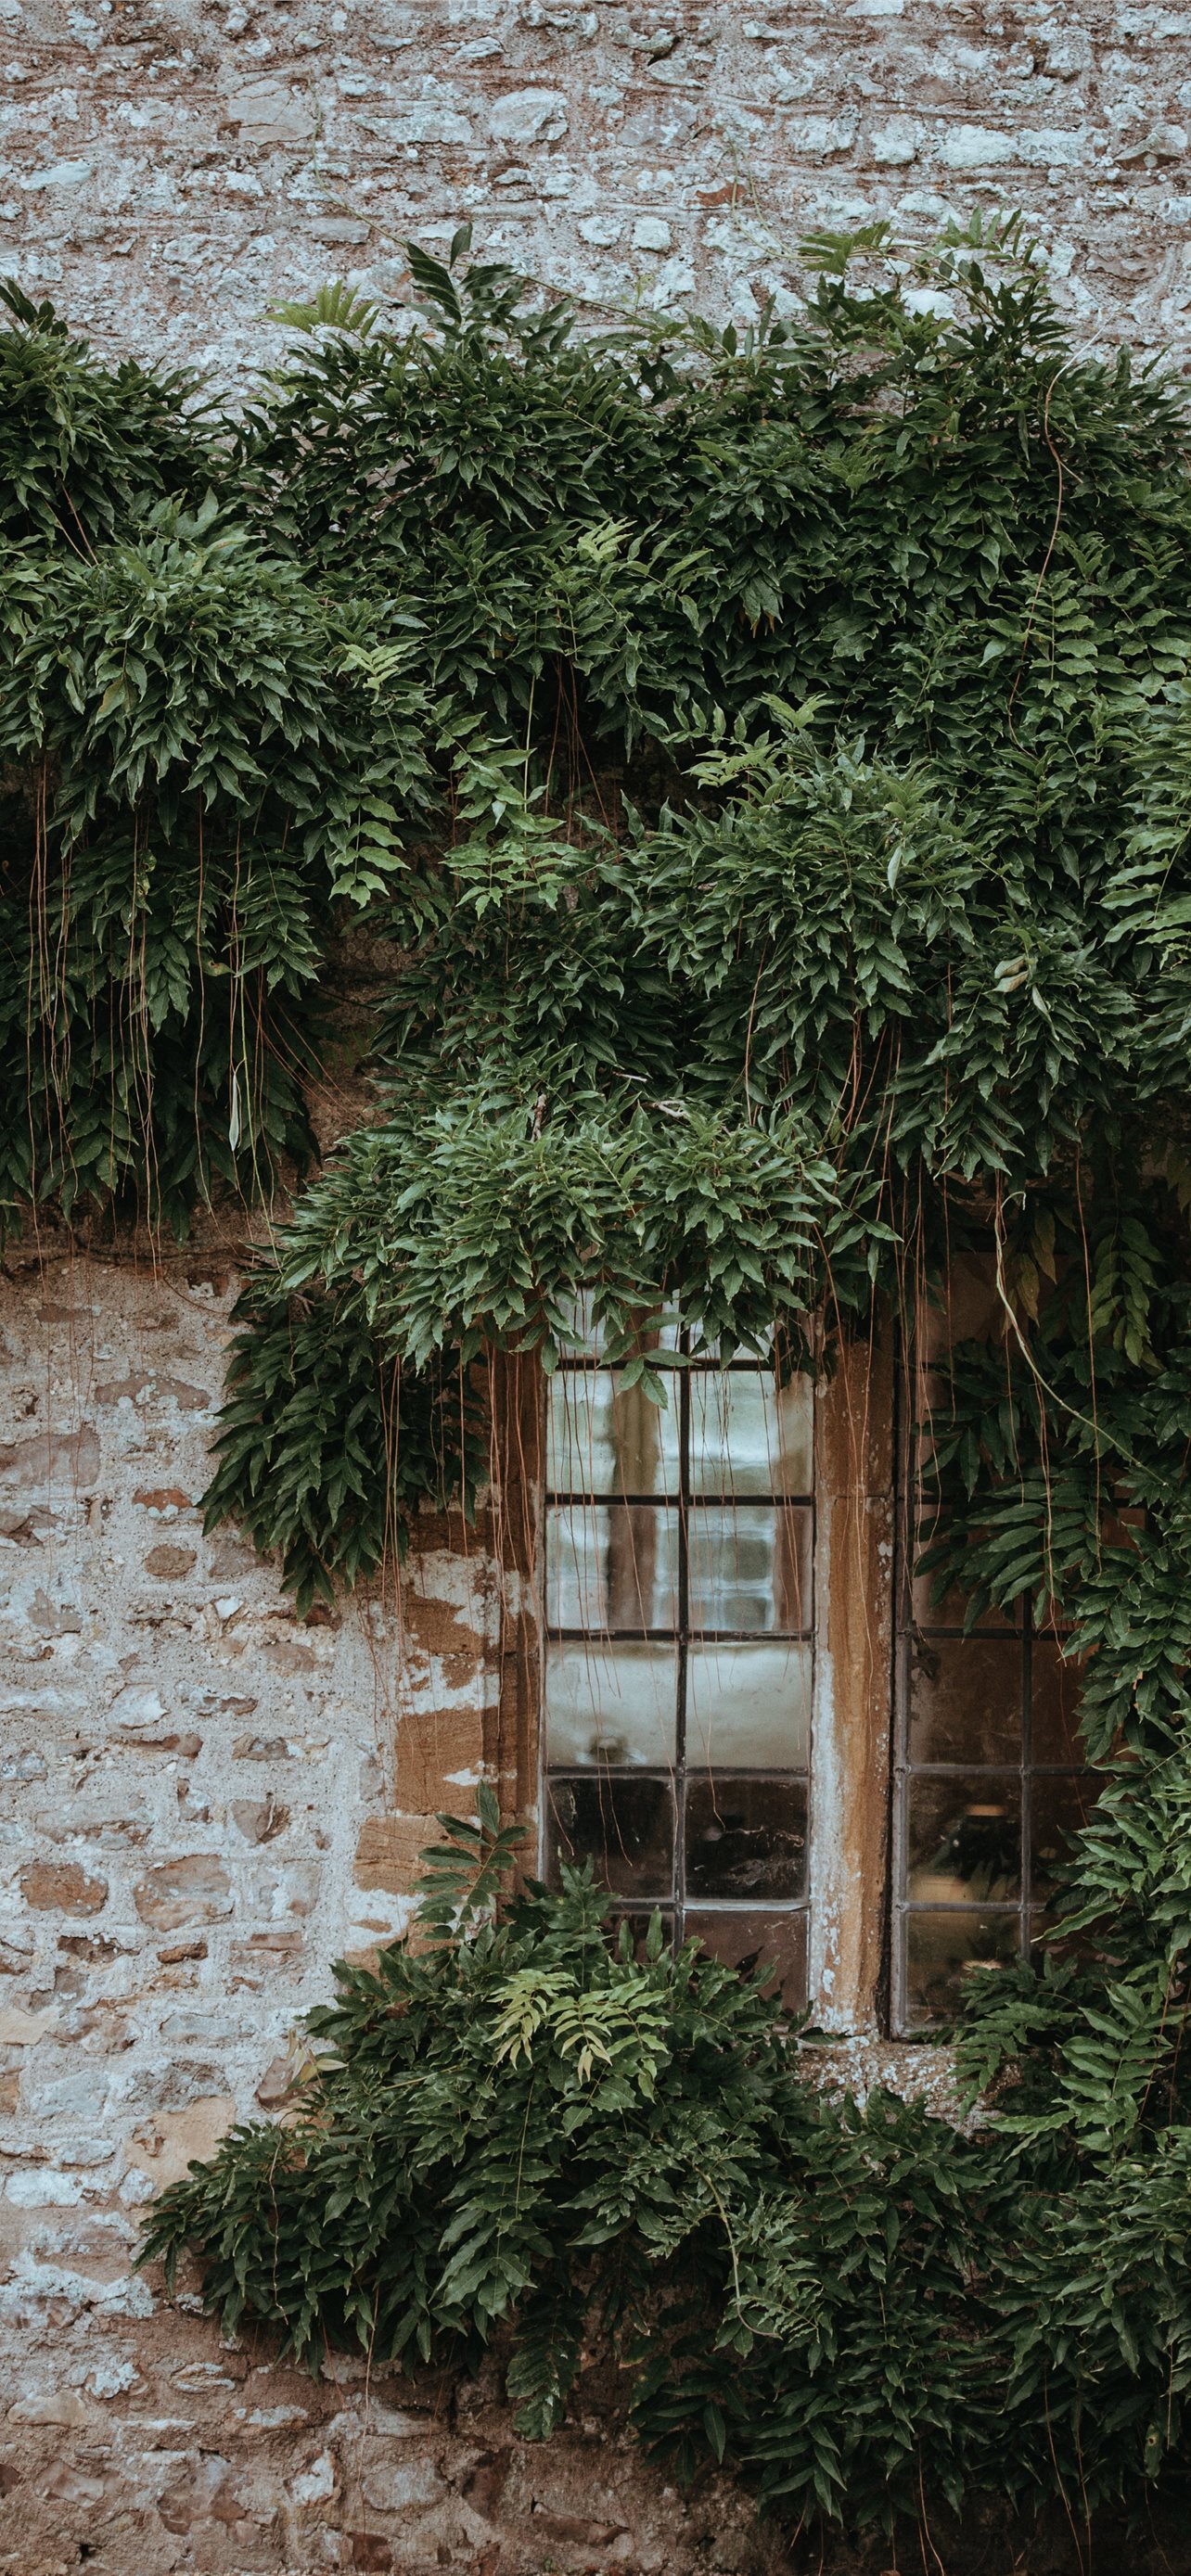 glass window surrounded by green leafed plants iPhone wallpaper 